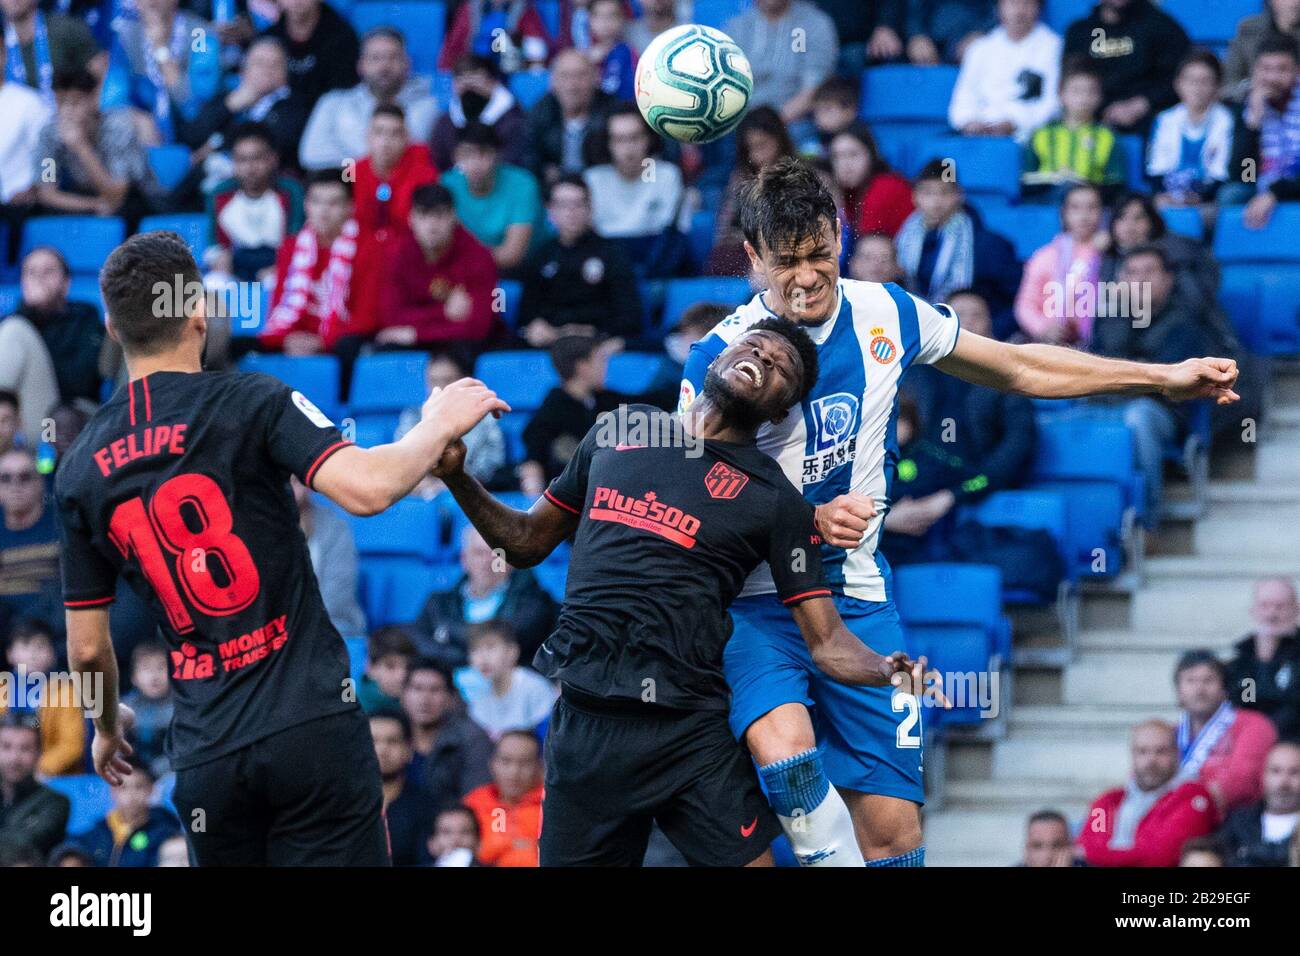 Barcelona. 1st Mar, 2020. RCD Espanyol's Bernado Espinosa (R) competes during a Spanish league match between RCD Espanyol and Athletico Madrid in Barcelona, Spain on March 1, 2020. Credit: Joan Gosa/Xinhua/Alamy Live News Stock Photo